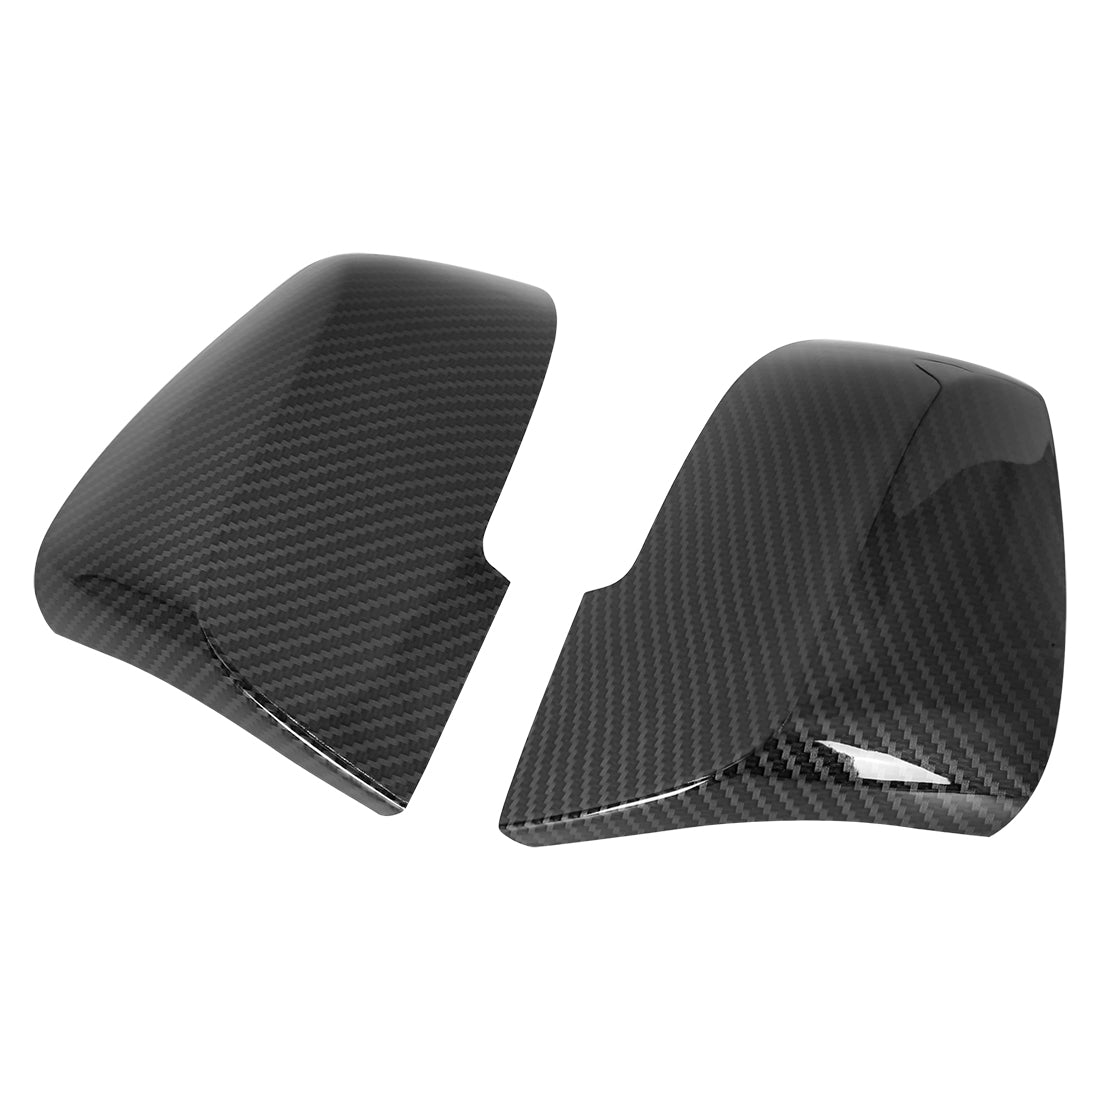 X AUTOHAUX Pair Car Exterior Rear View Mirror Cover Housing Door Wing Mirror Covering Cap Carbon Fiber Pattern for BMW F30 F32 2013-2018